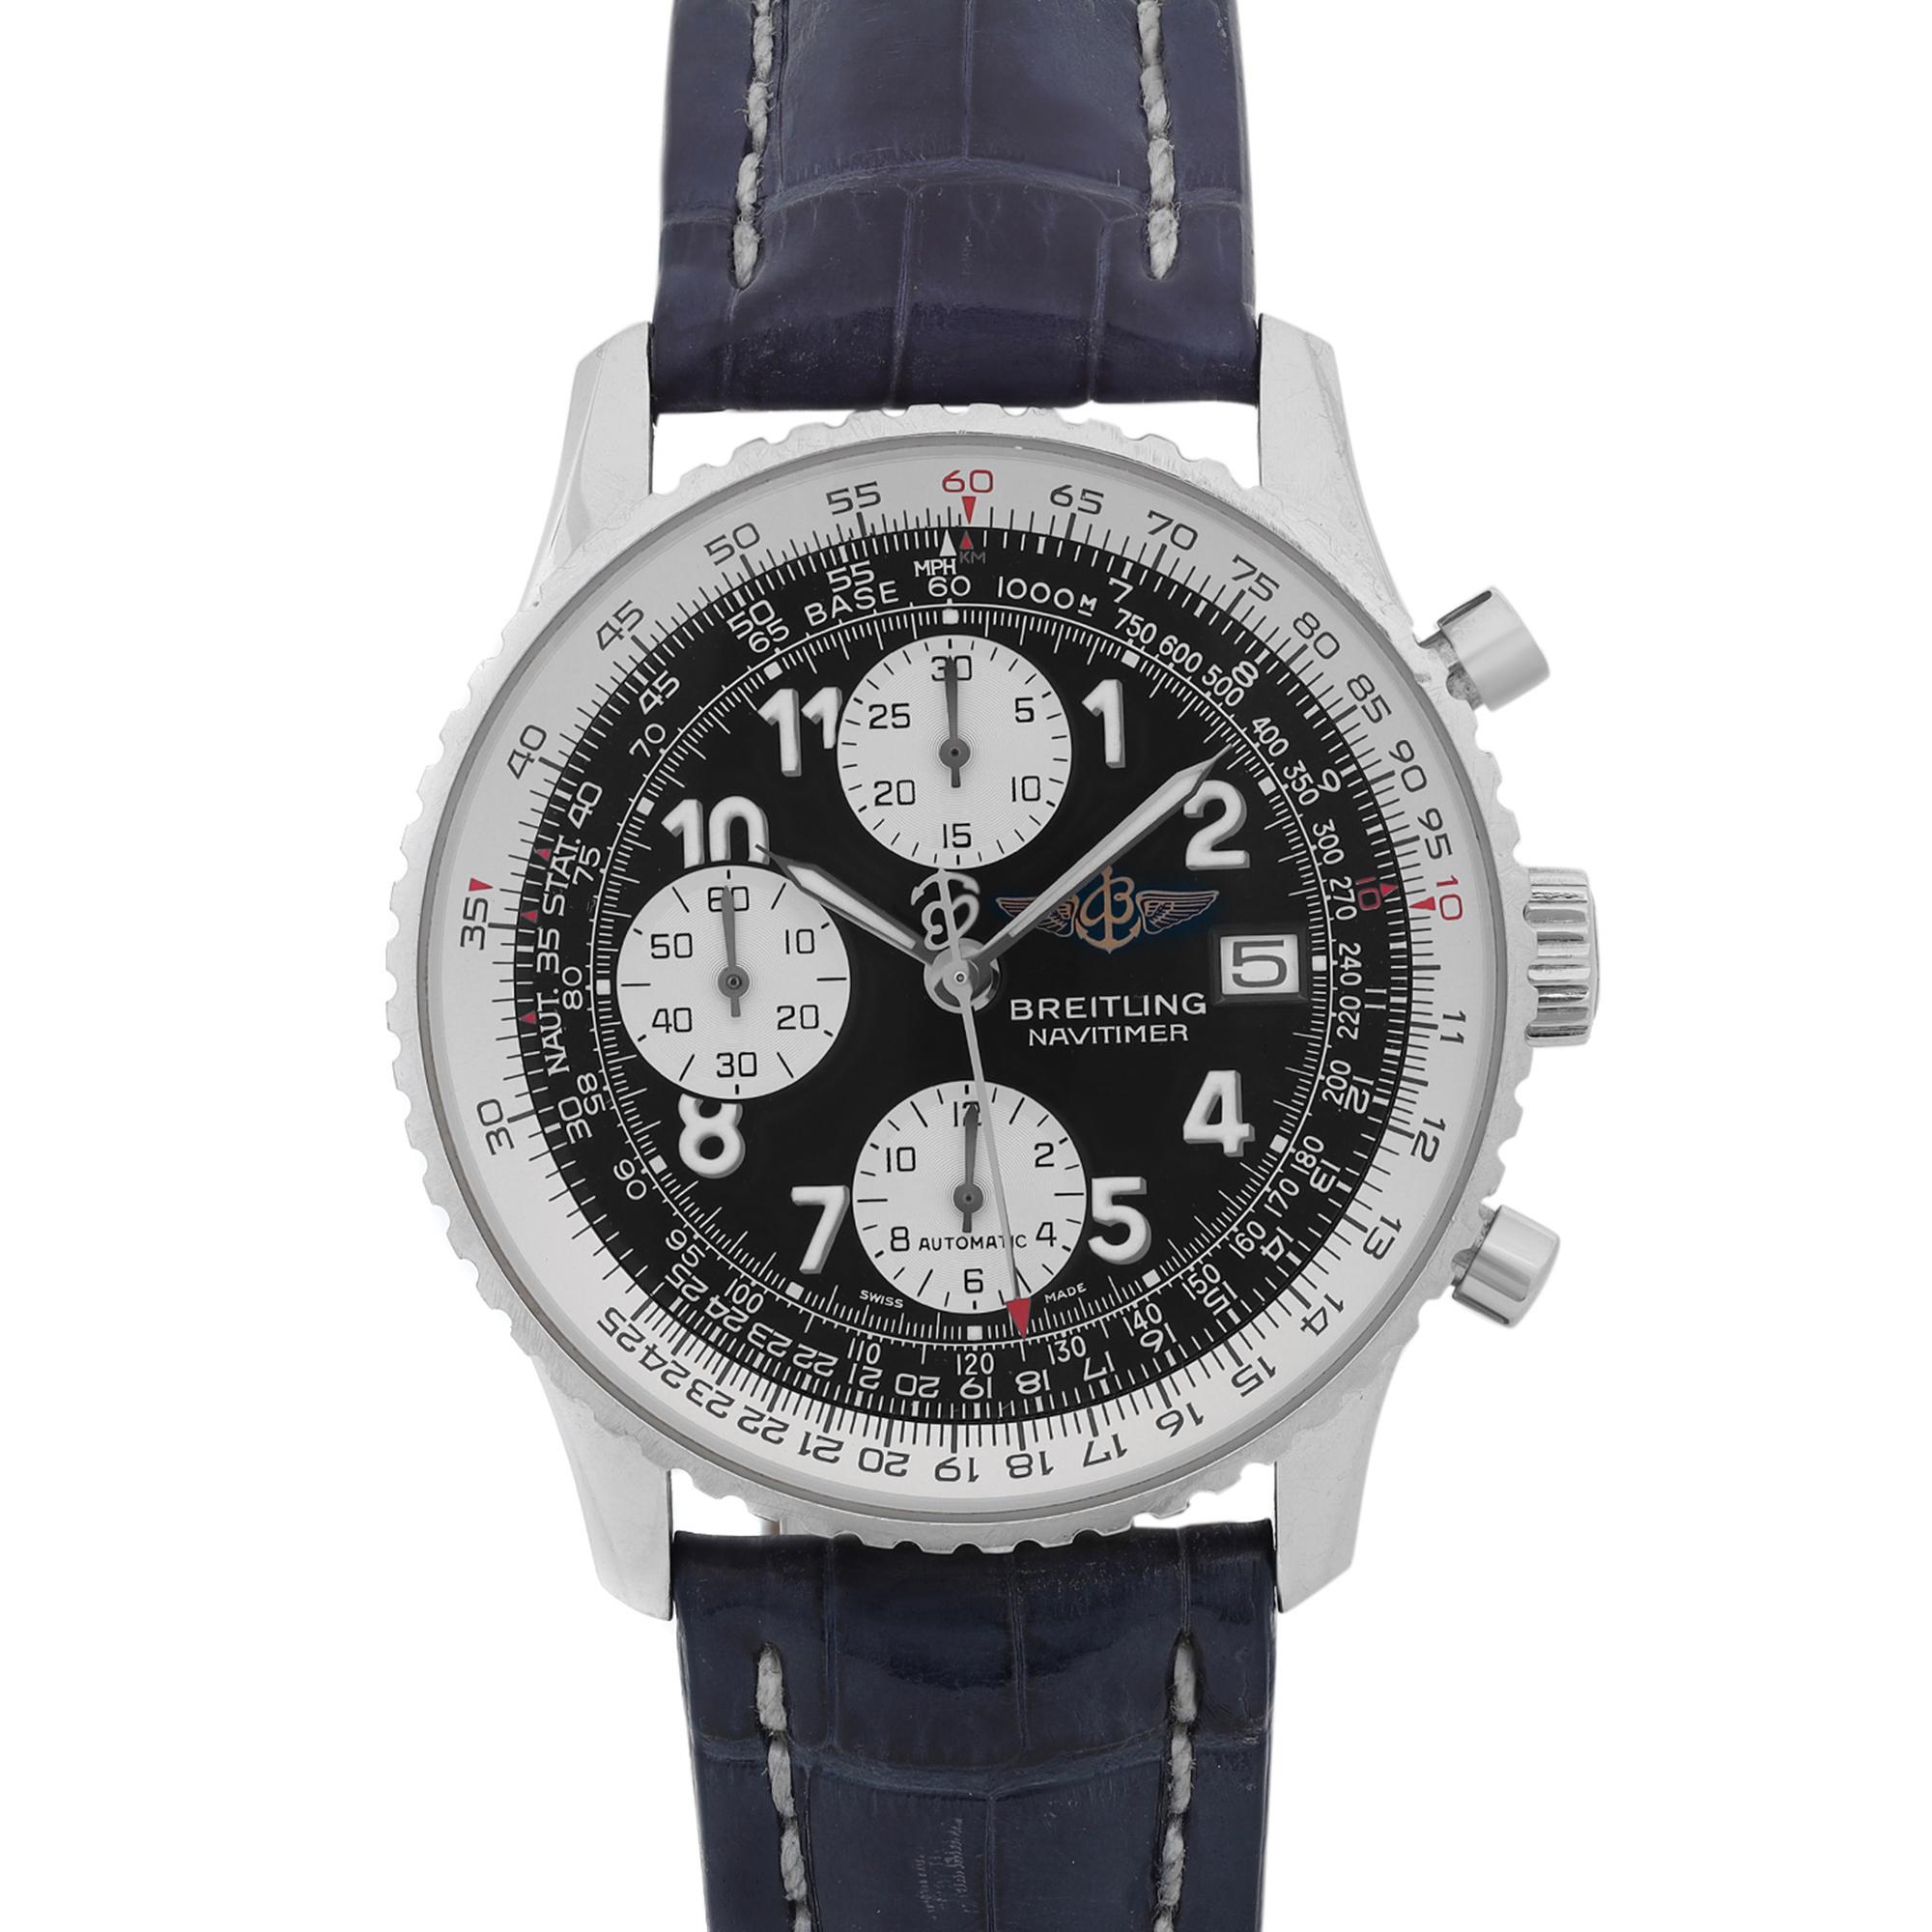 Pre-owned and in excellent condition. Sign of wear on leather strap.

 Brand: Breitling  Type: Wristwatch  Department: Men  Model Number: A13322  Country/Region of Manufacture: Switzerland  Style: Luxury  Model: Breitling Old Navitimer  Vintage: Yes